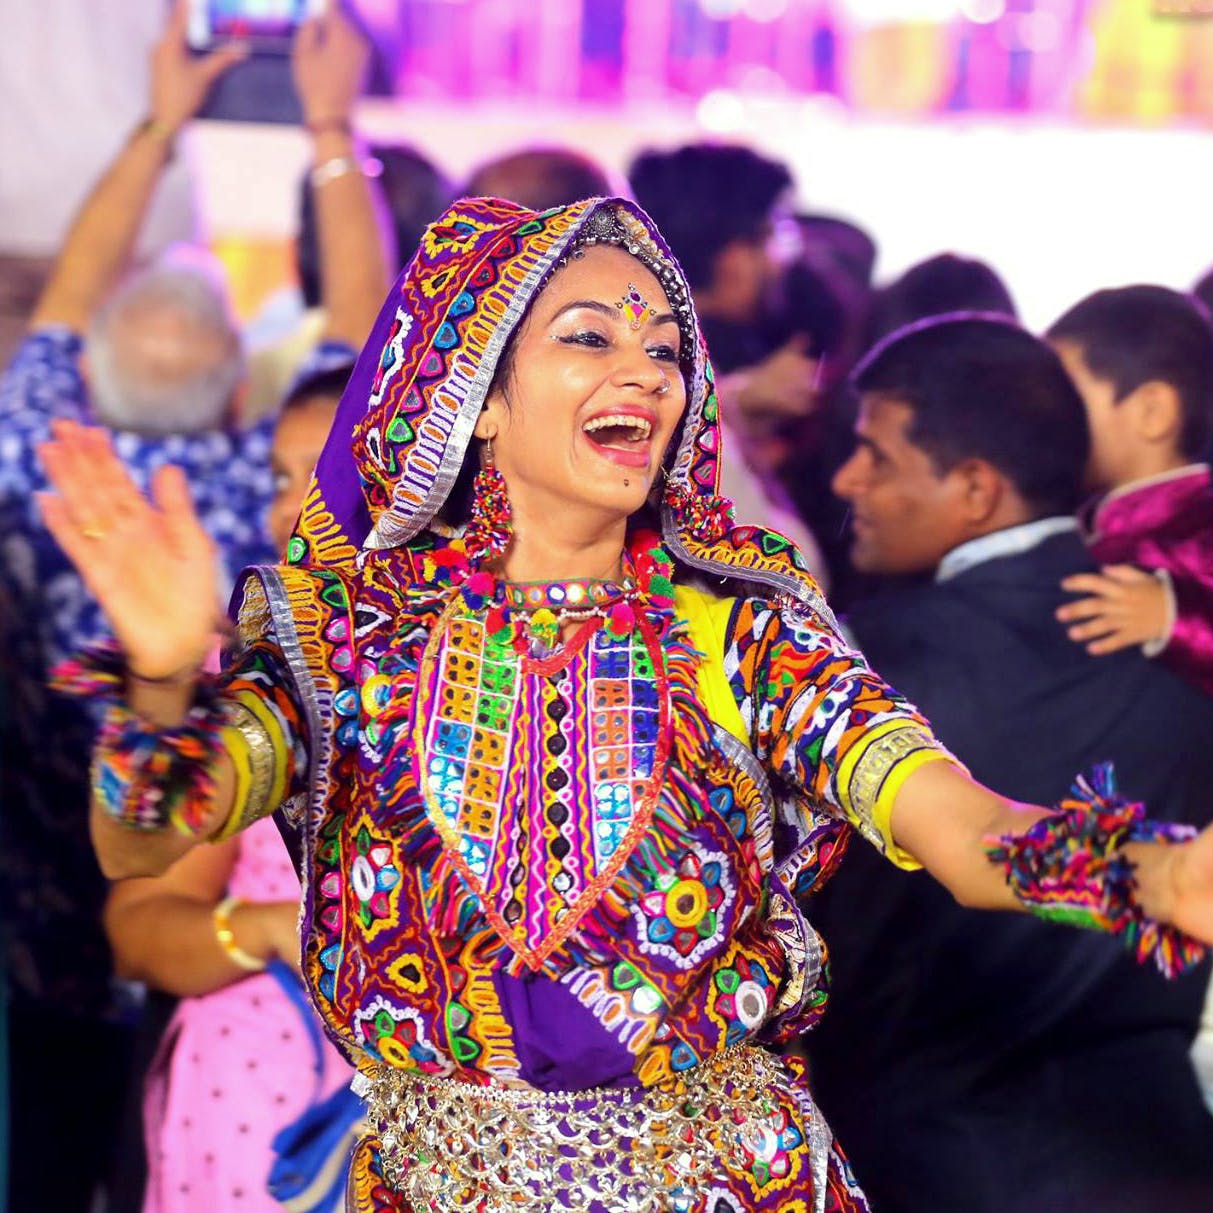 People,Facial expression,Tradition,Event,Purple,Smile,Performance,Folk dance,Dancer,Fun